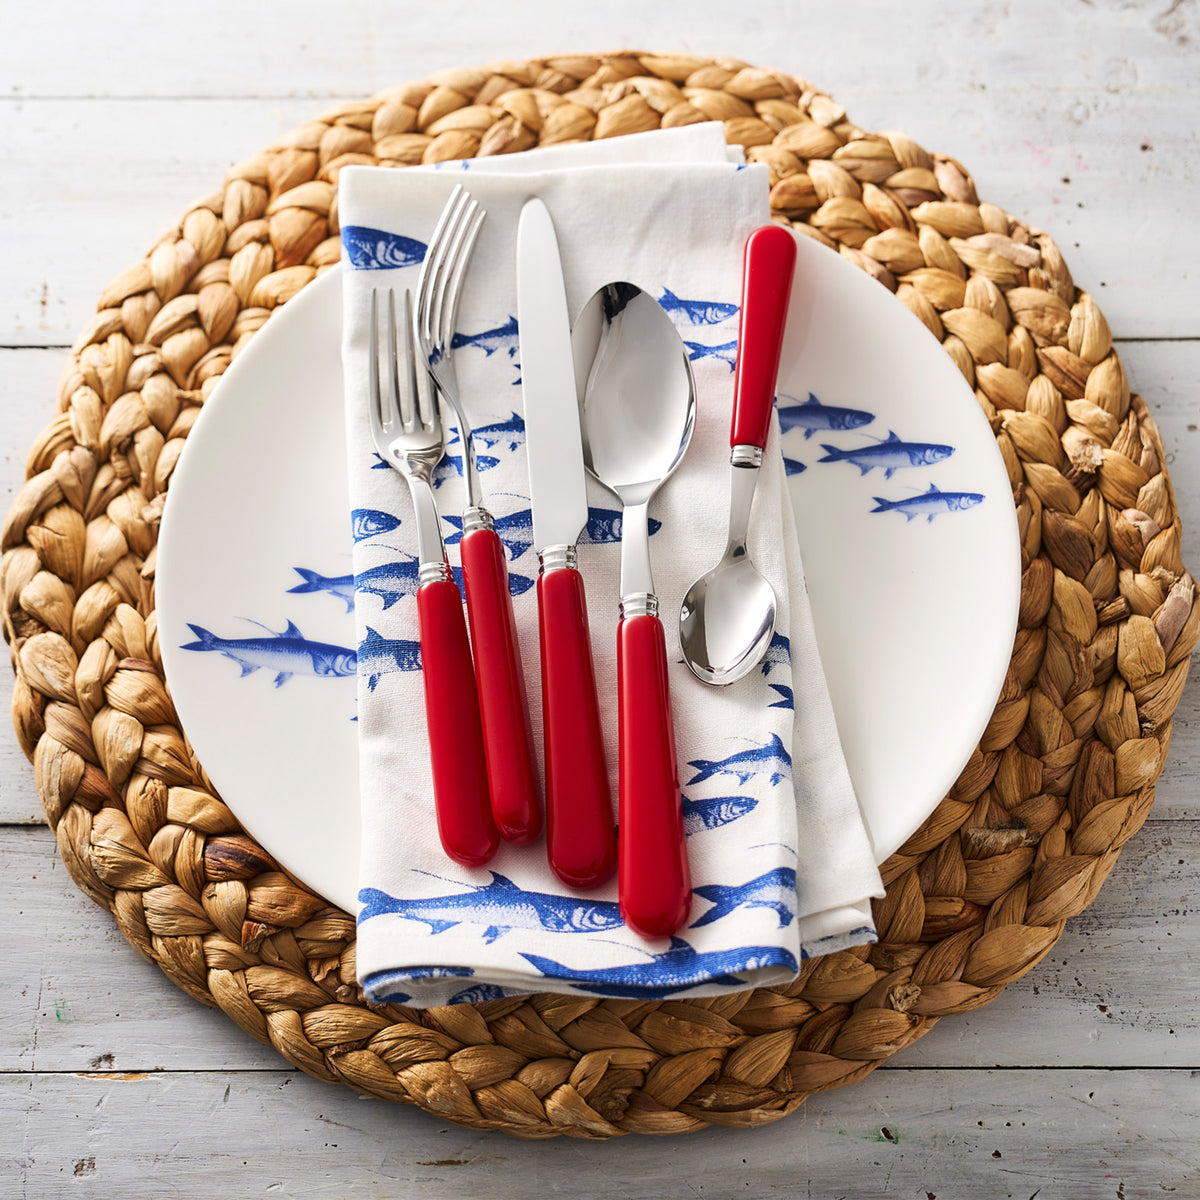 A neatly arranged dinner setting with School of Fish Coupe Dinner Plates from Caskata Artisanal Home, red-handled cutlery on a blue and white napkin, all resting on a round woven placemat.